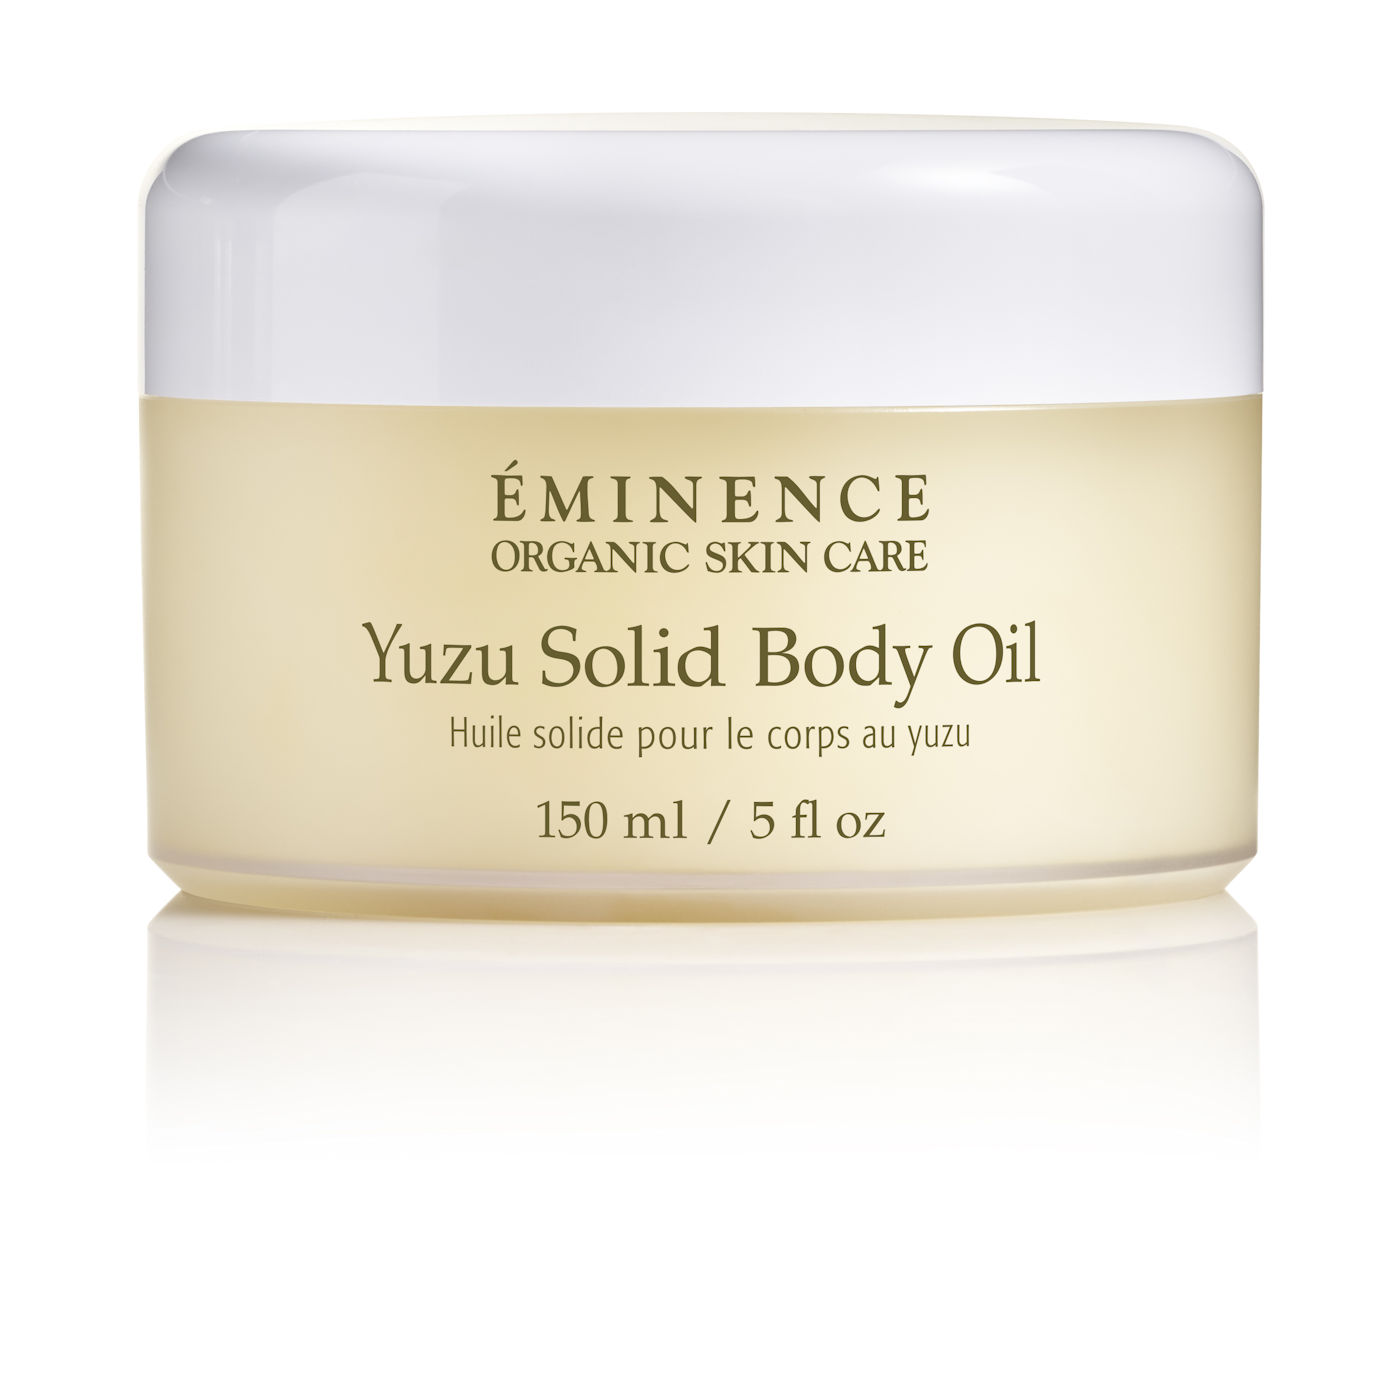 Yuzu Solid Body Oil - Eminence Organic Skin Care from The Spa Within in Detroit Lakes, MN 